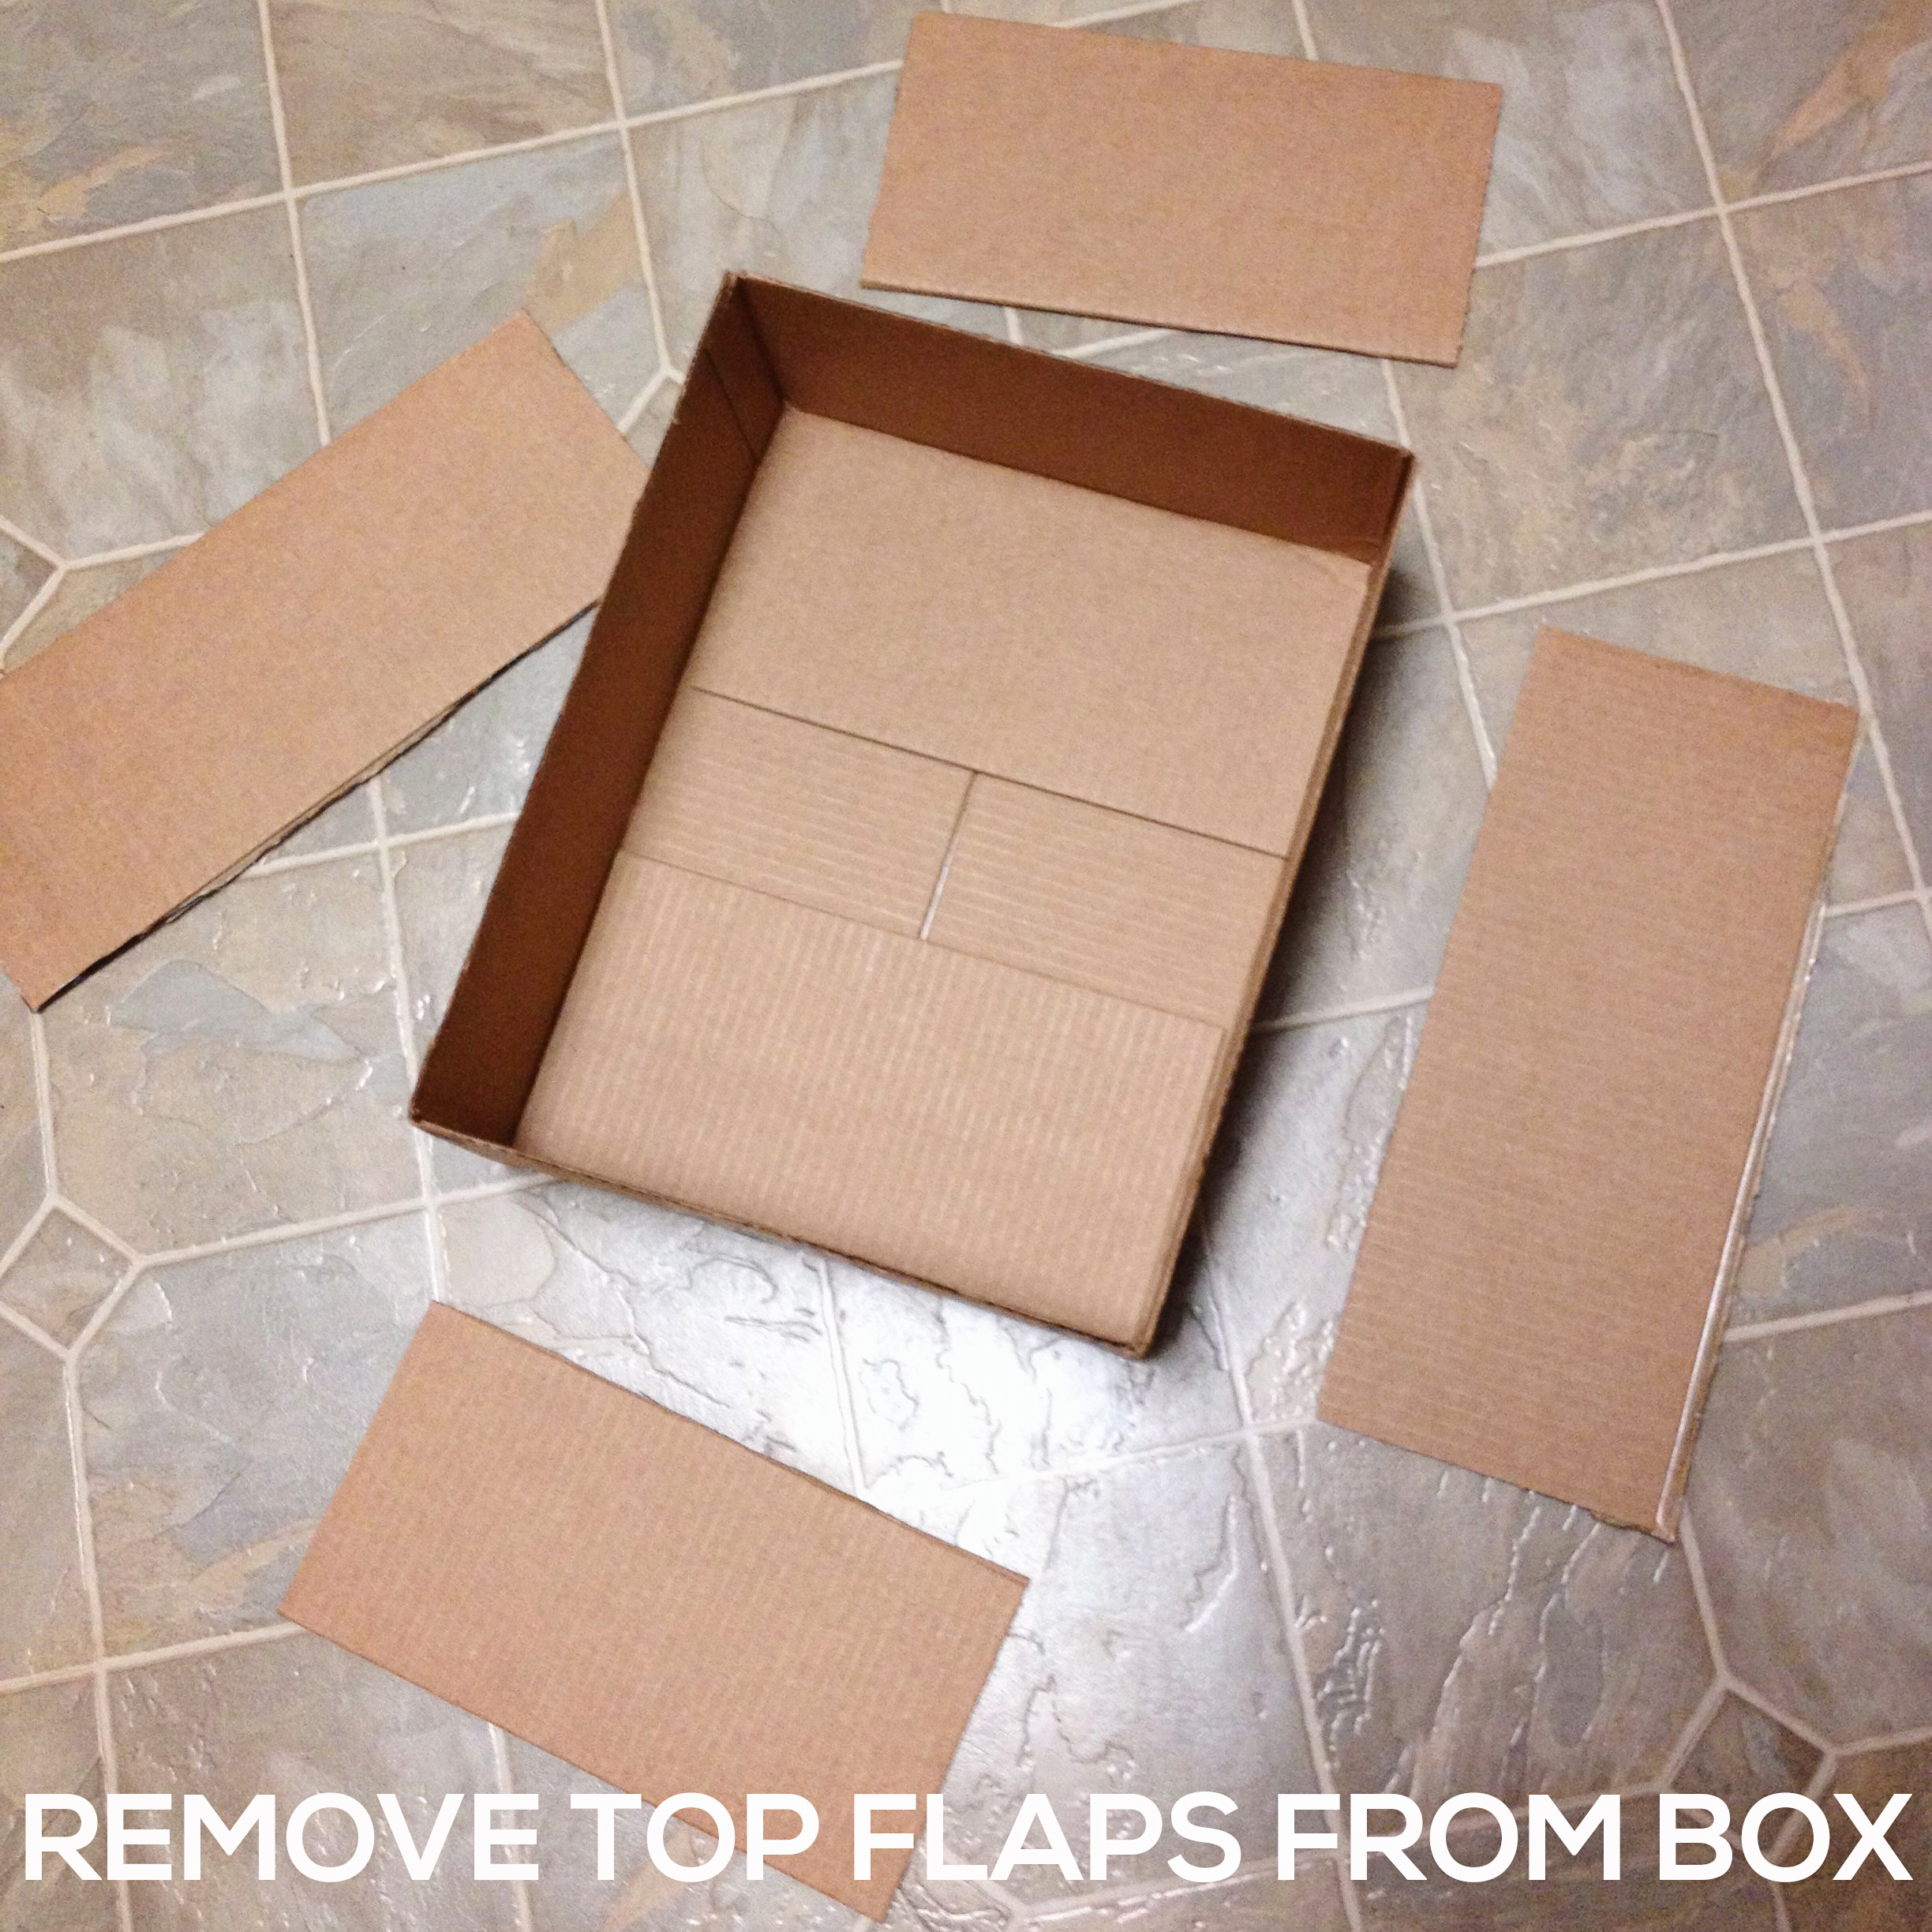 REMOVE-TOP-FLAPS Make a DIY Box Airplane Prop for Newborn Photography Guest Bloggers Photography Tips  